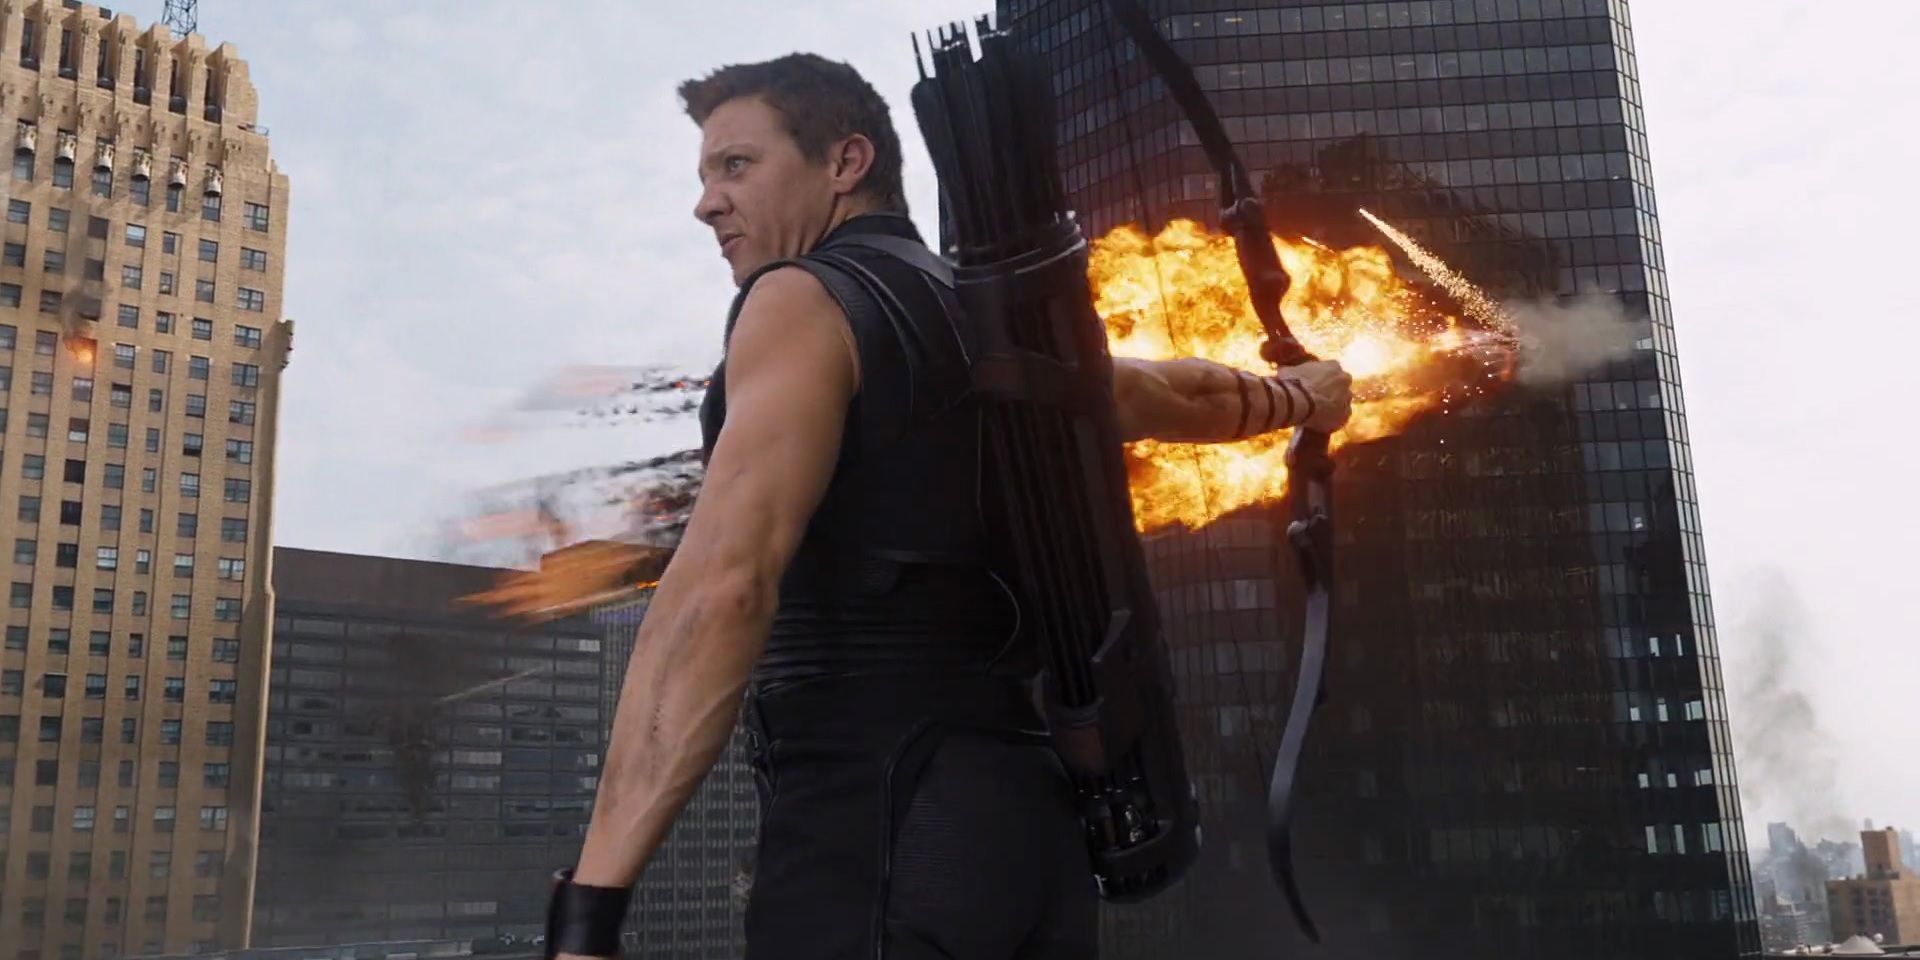 Hawkeye fighting in the Battle of New York in The Avengers